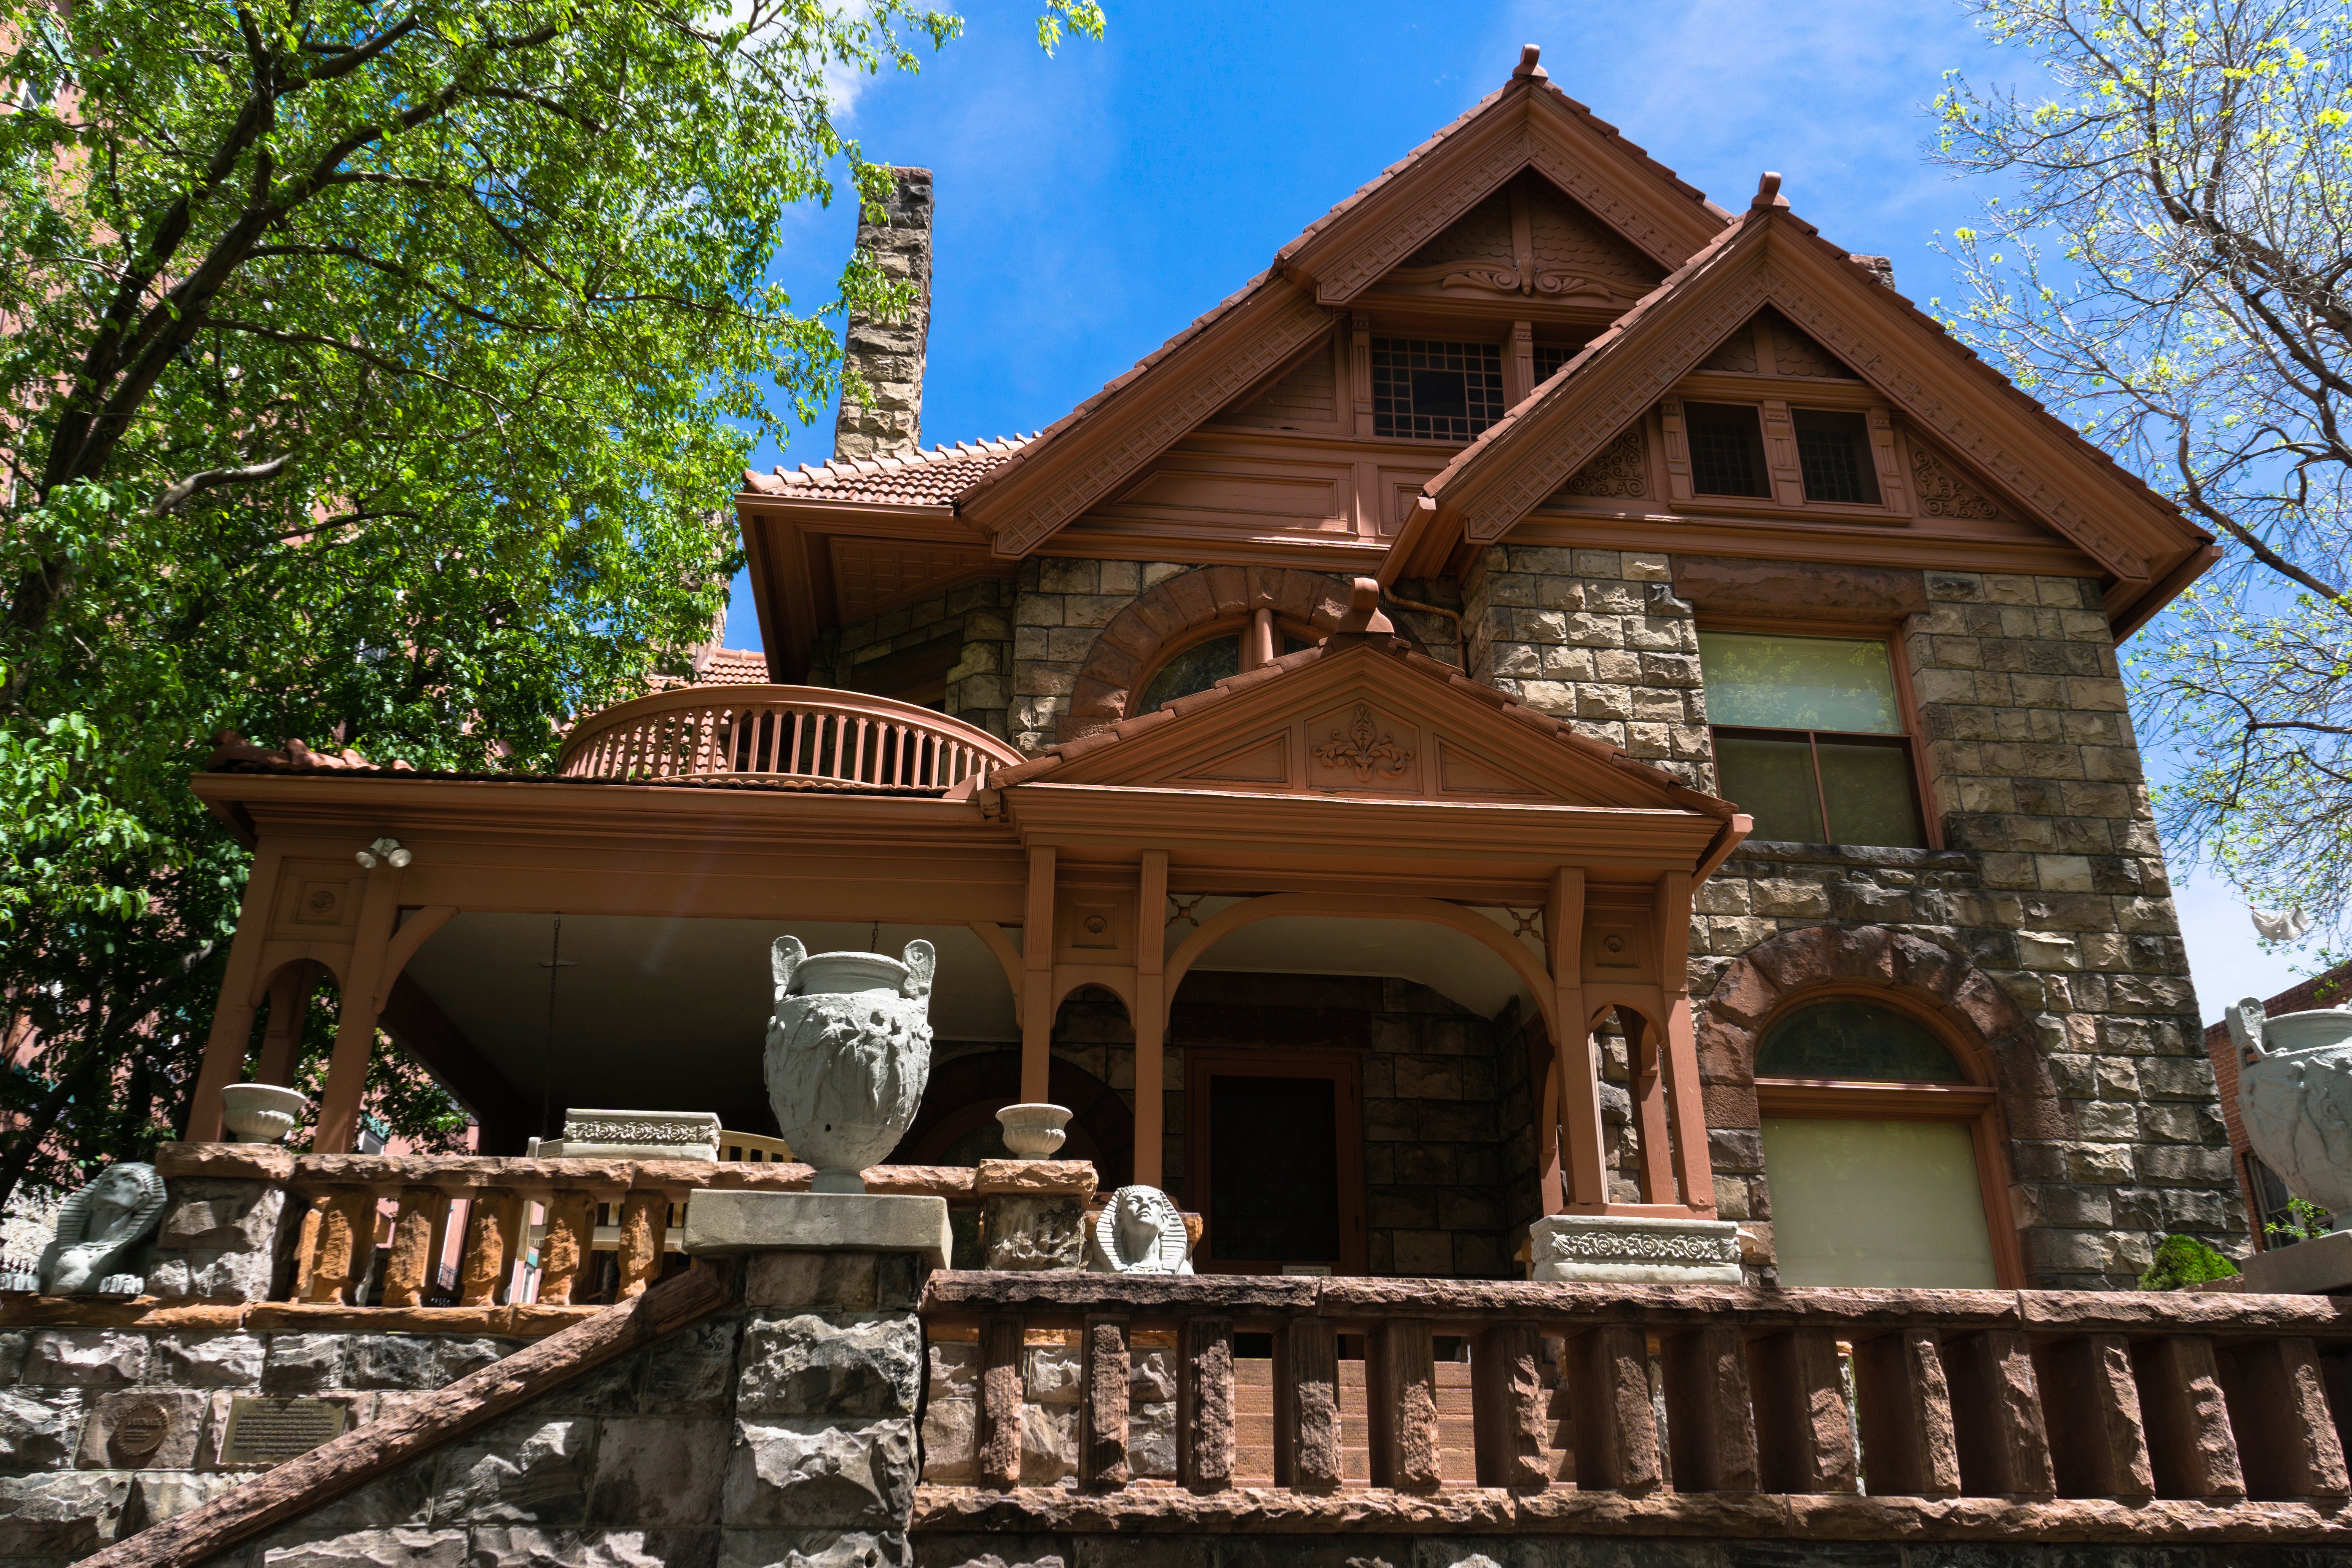 The Molly Brown House Museum